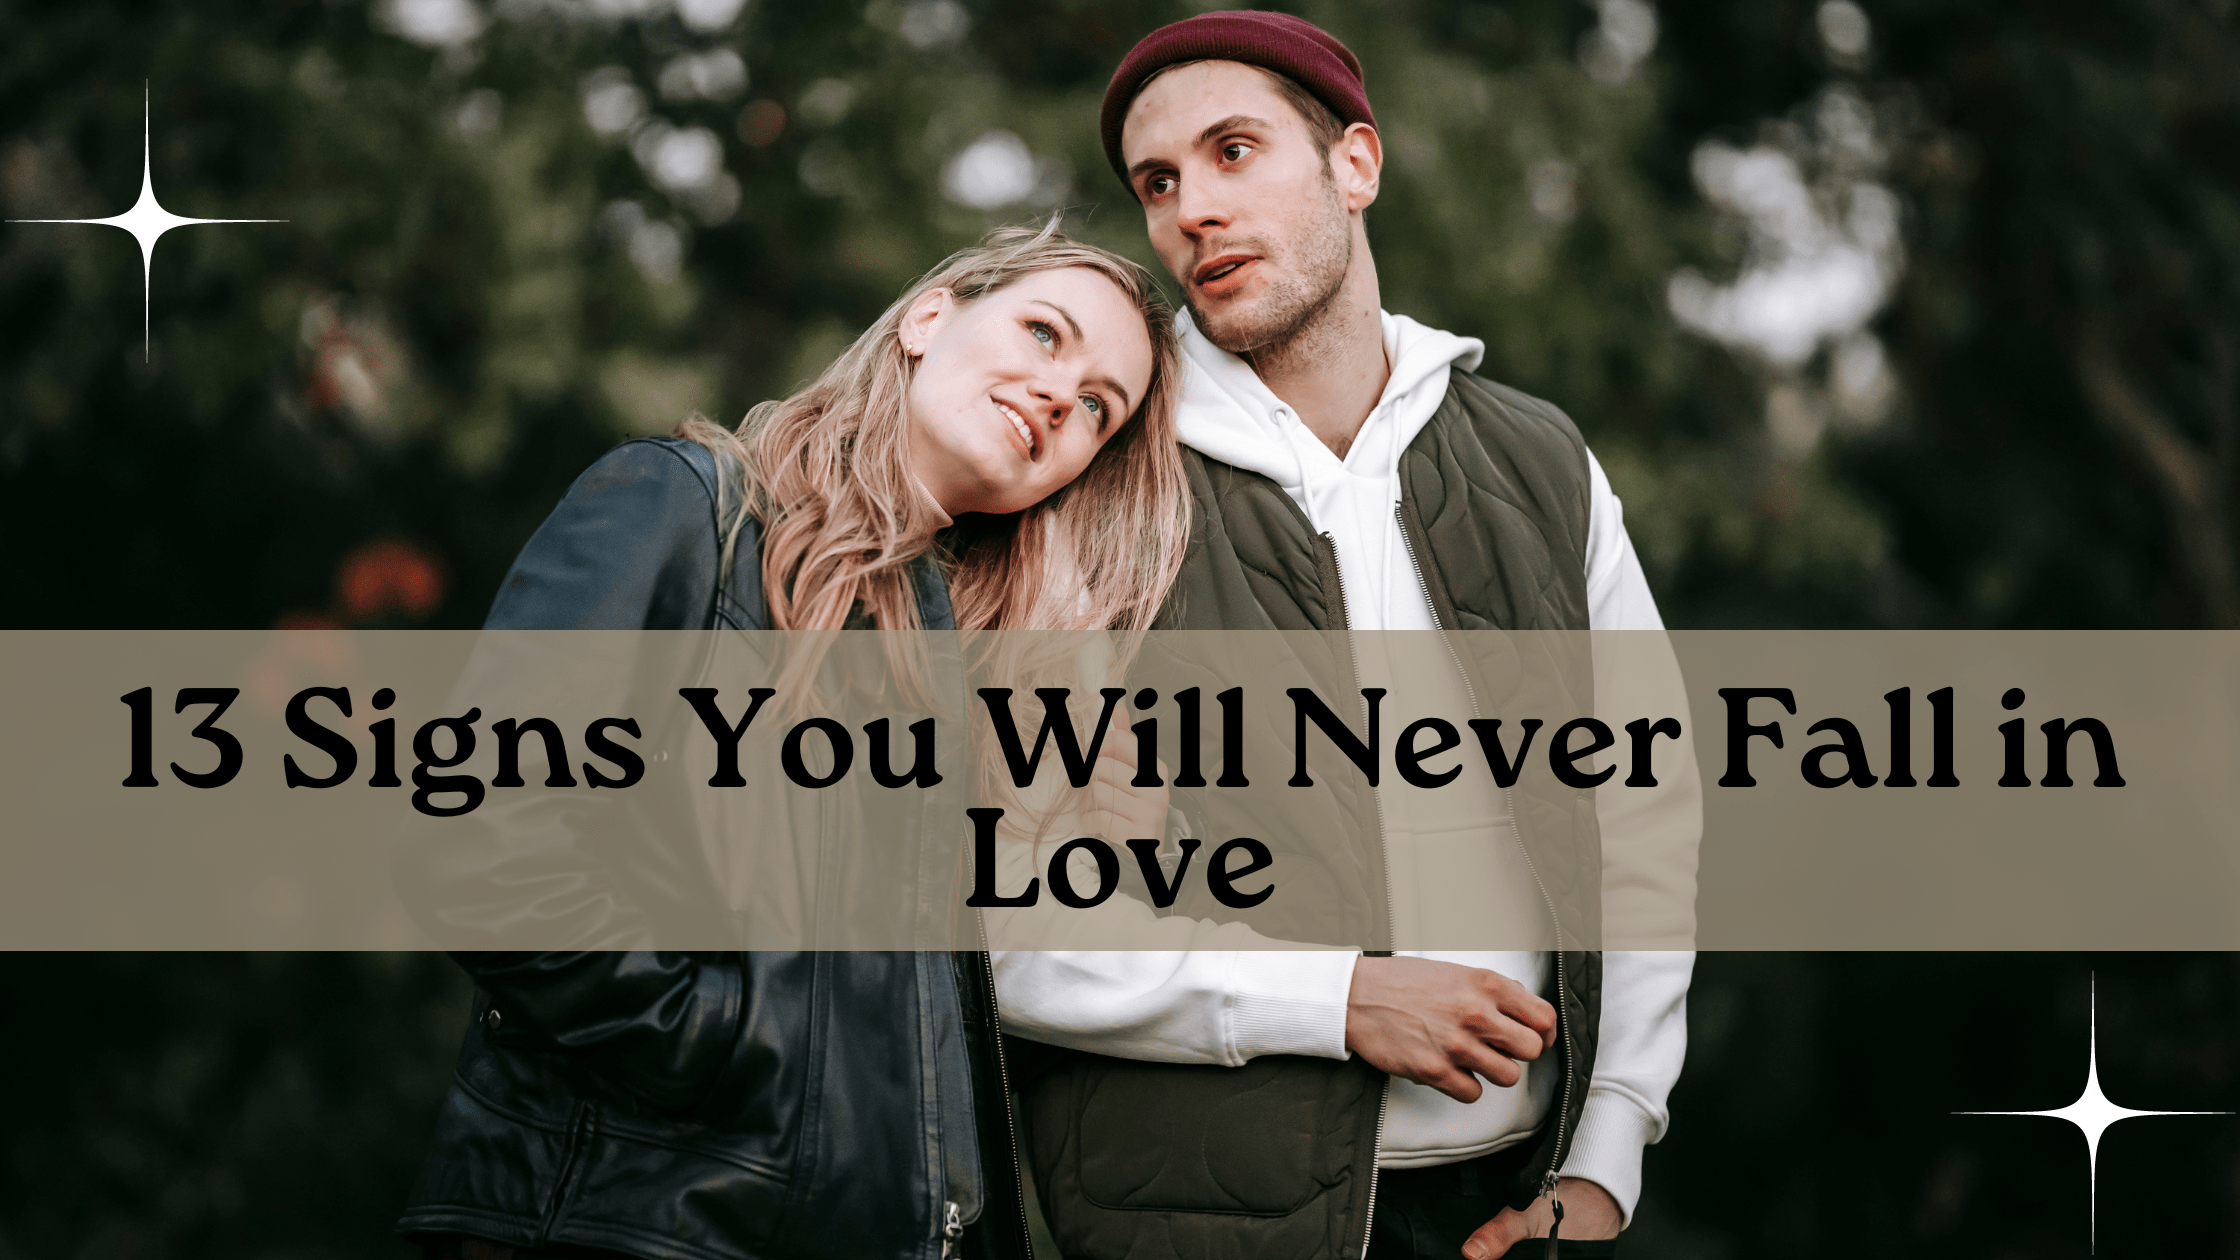 13 Signs You Will Never Fall in Love 3